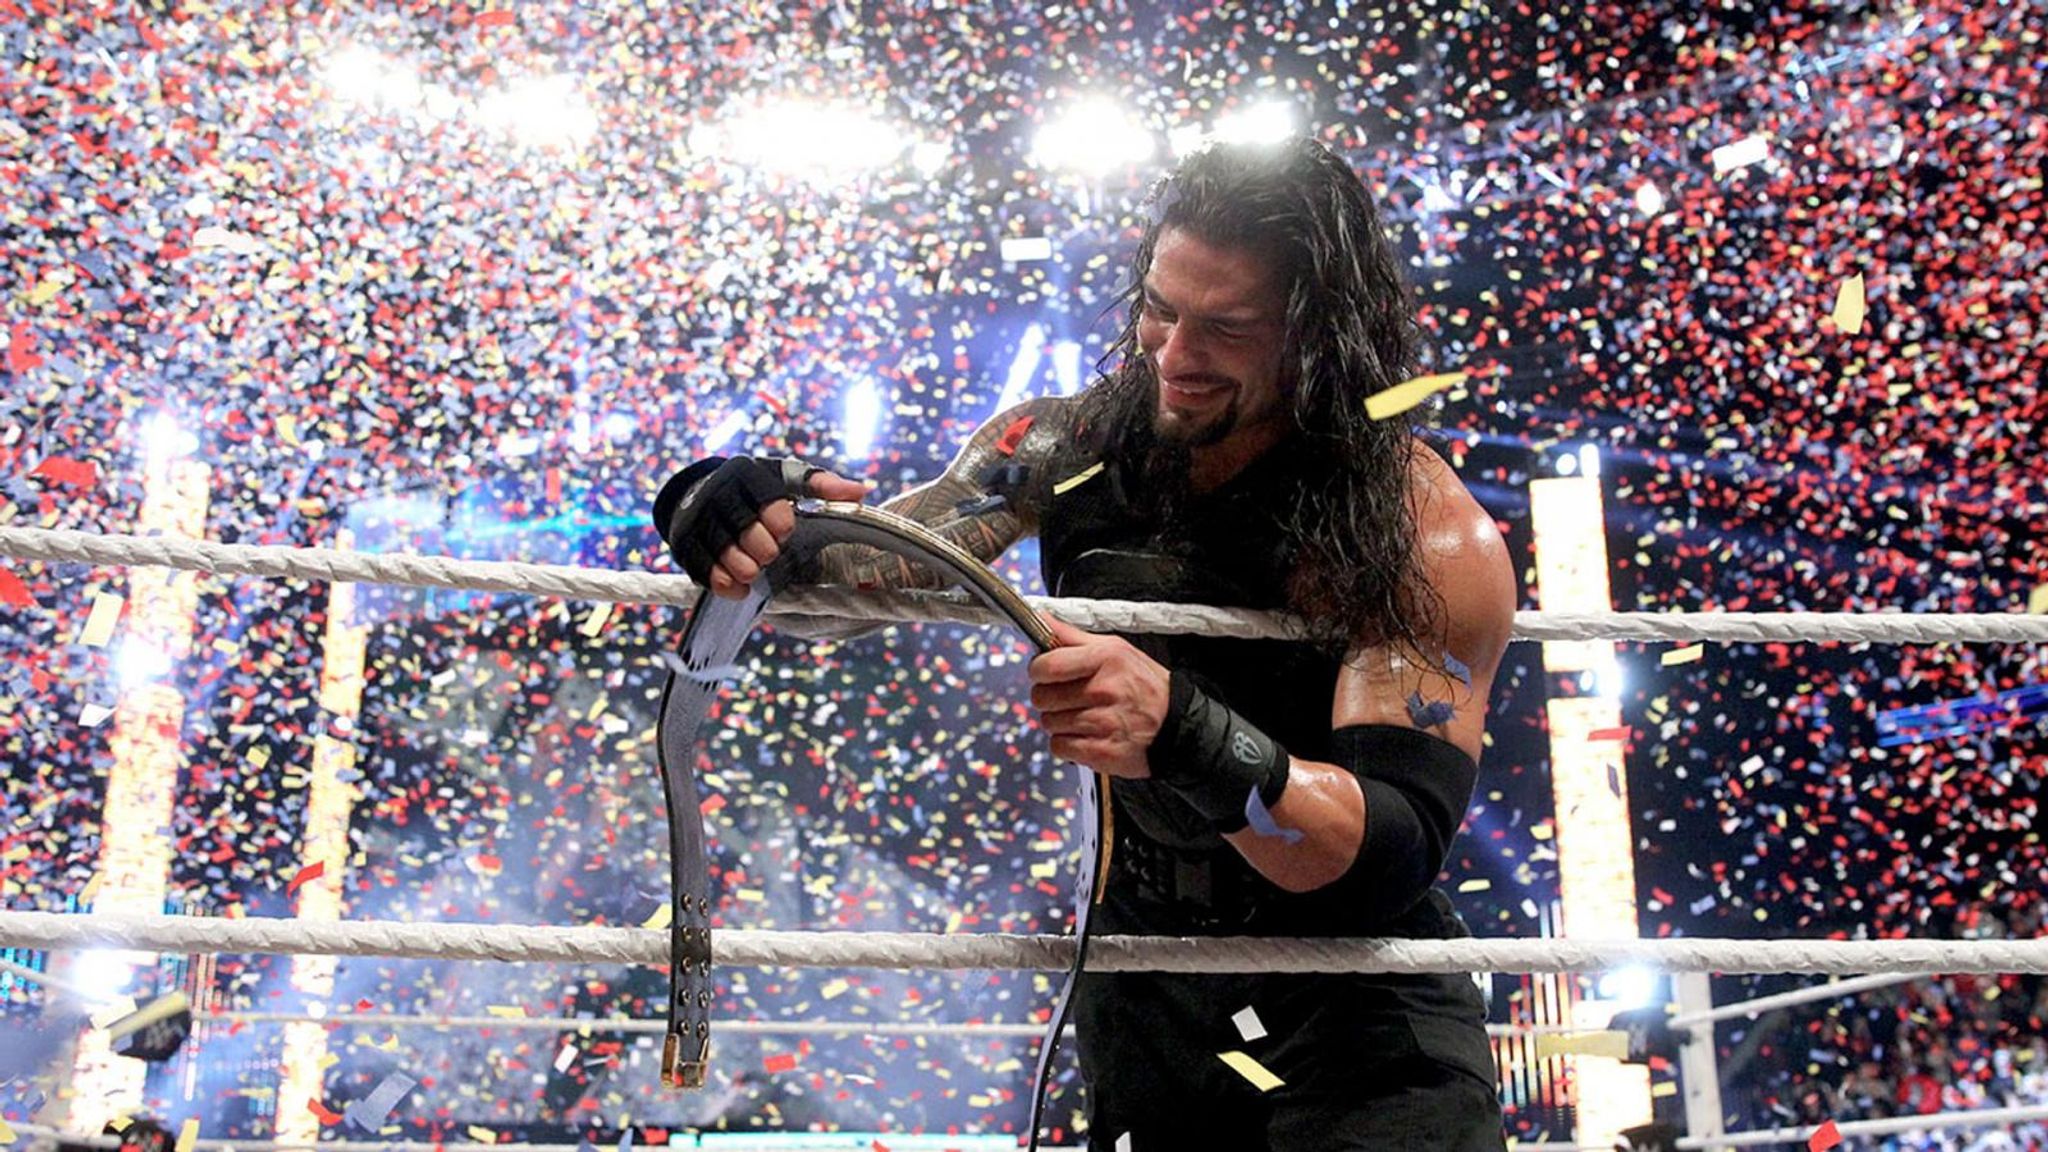 Wwe Survivor Series 2015 Roman Reigns Wins And Loses World